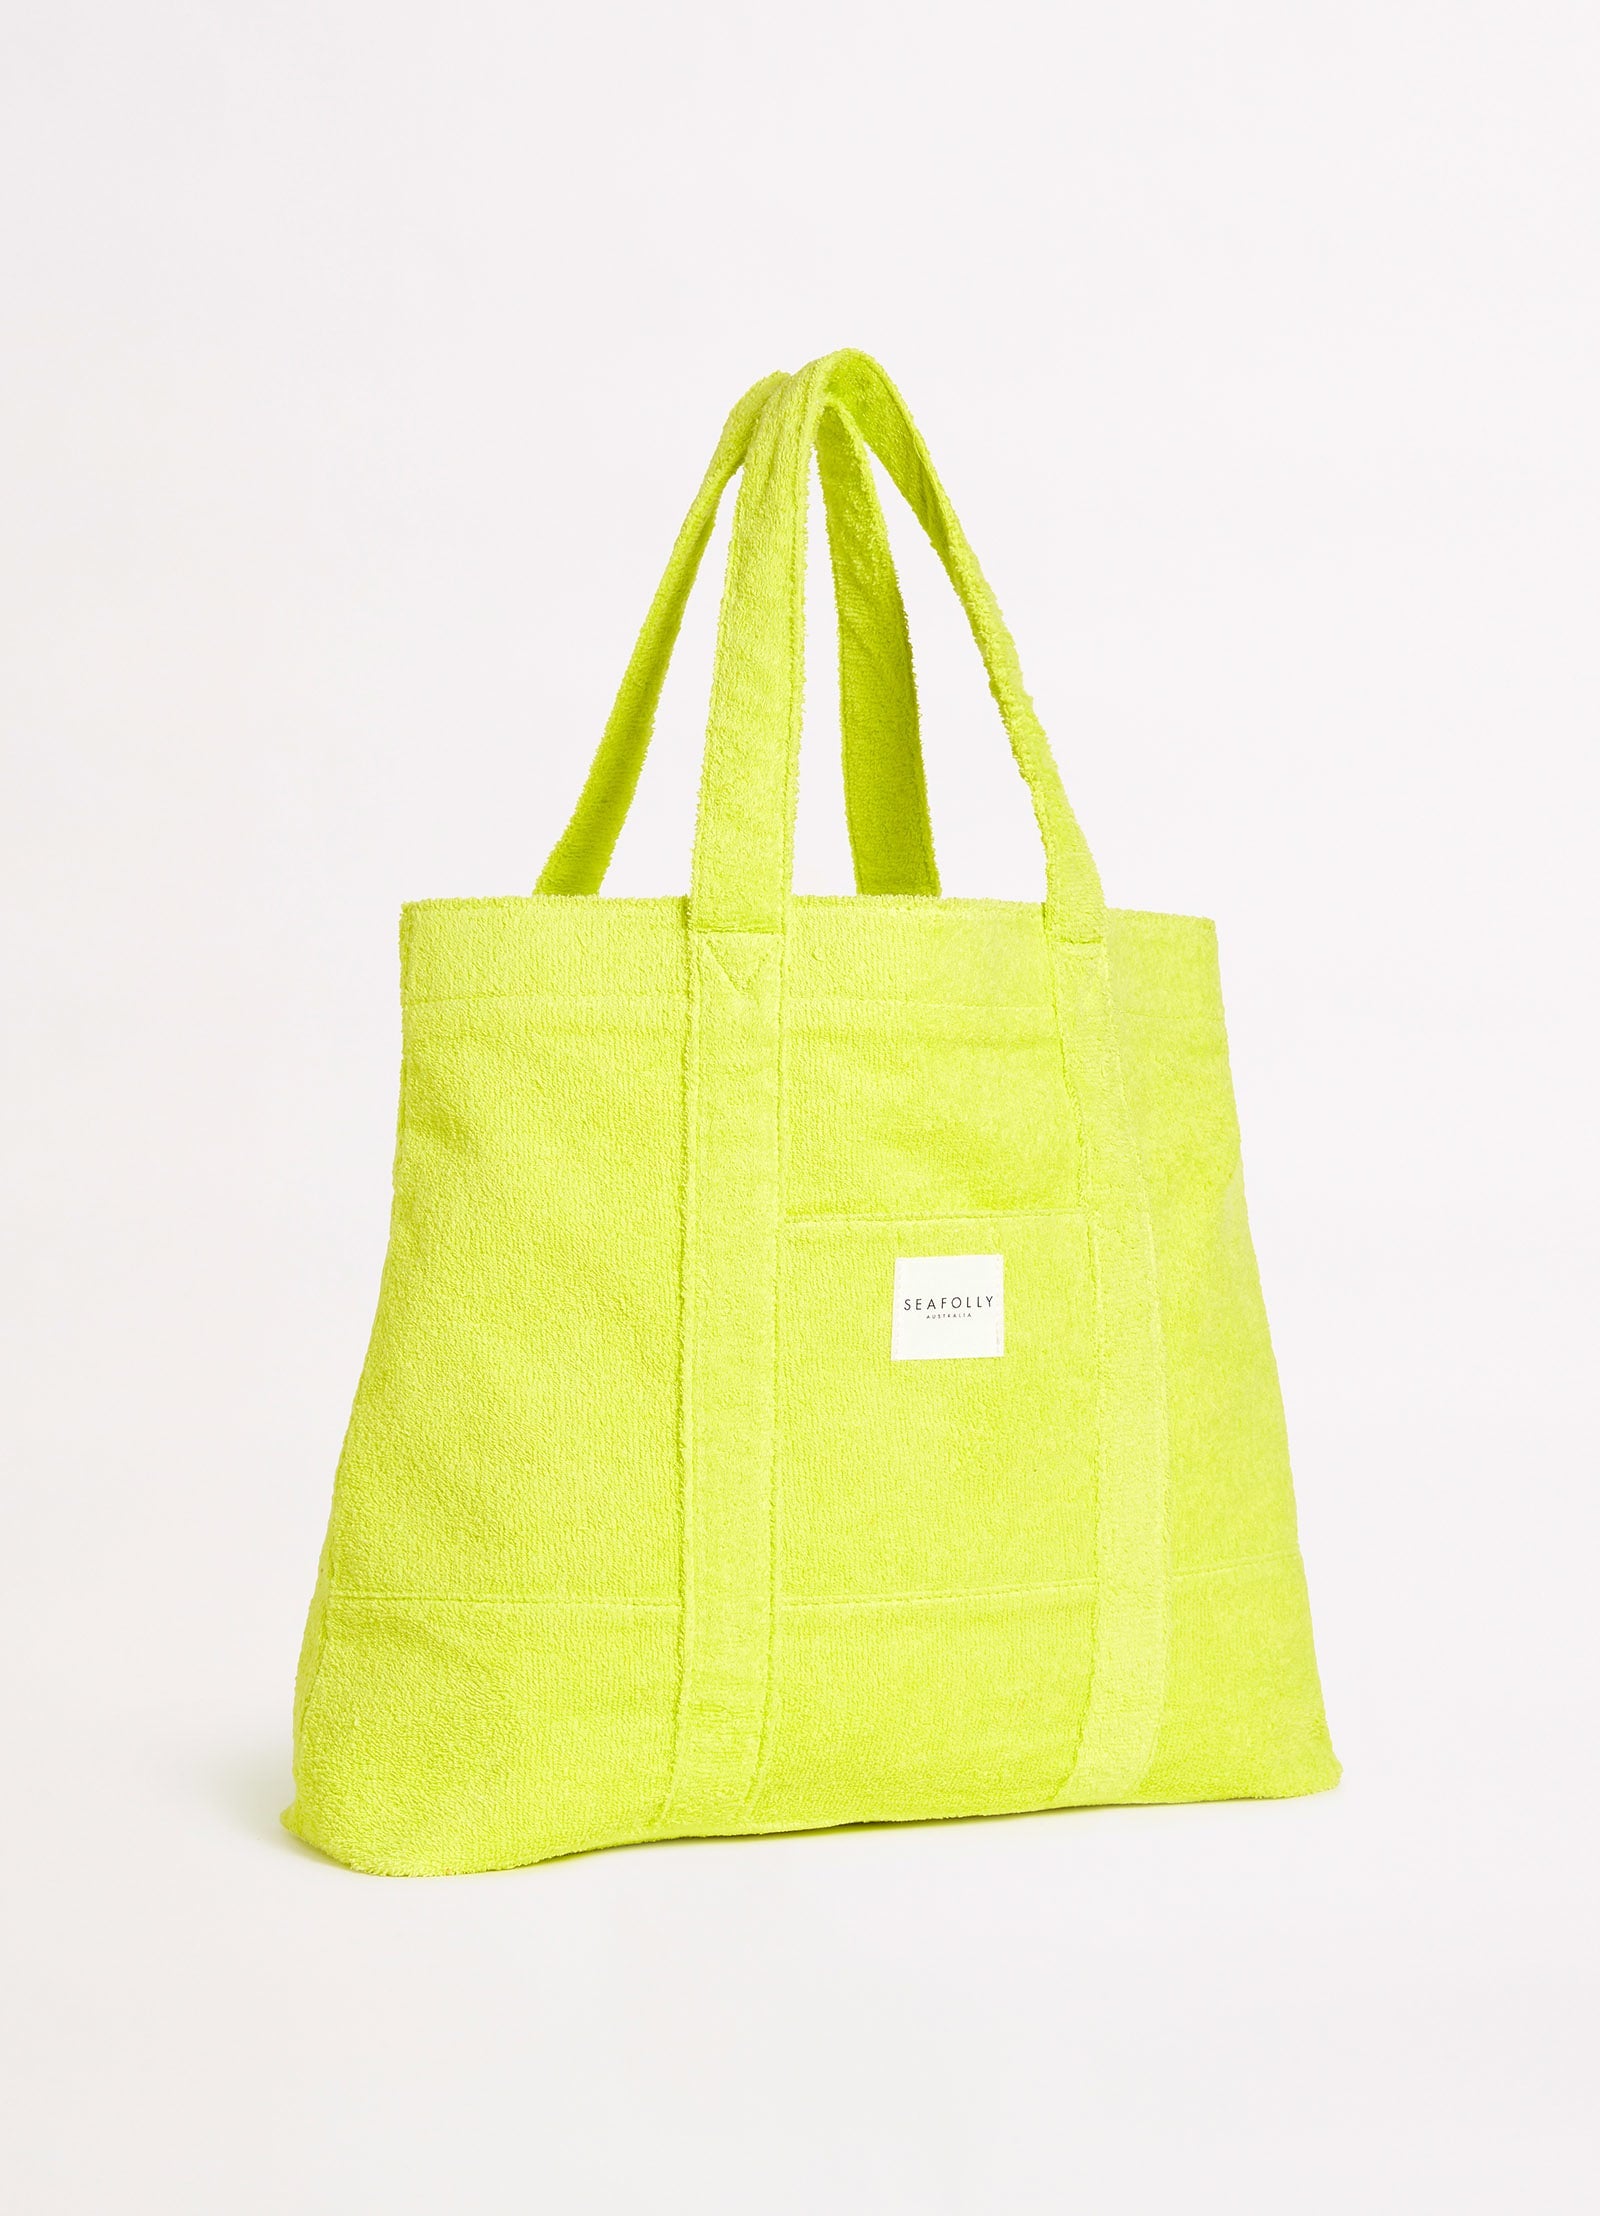 Seafolly Carried Away Woven Tote Bag | Neiman Marcus